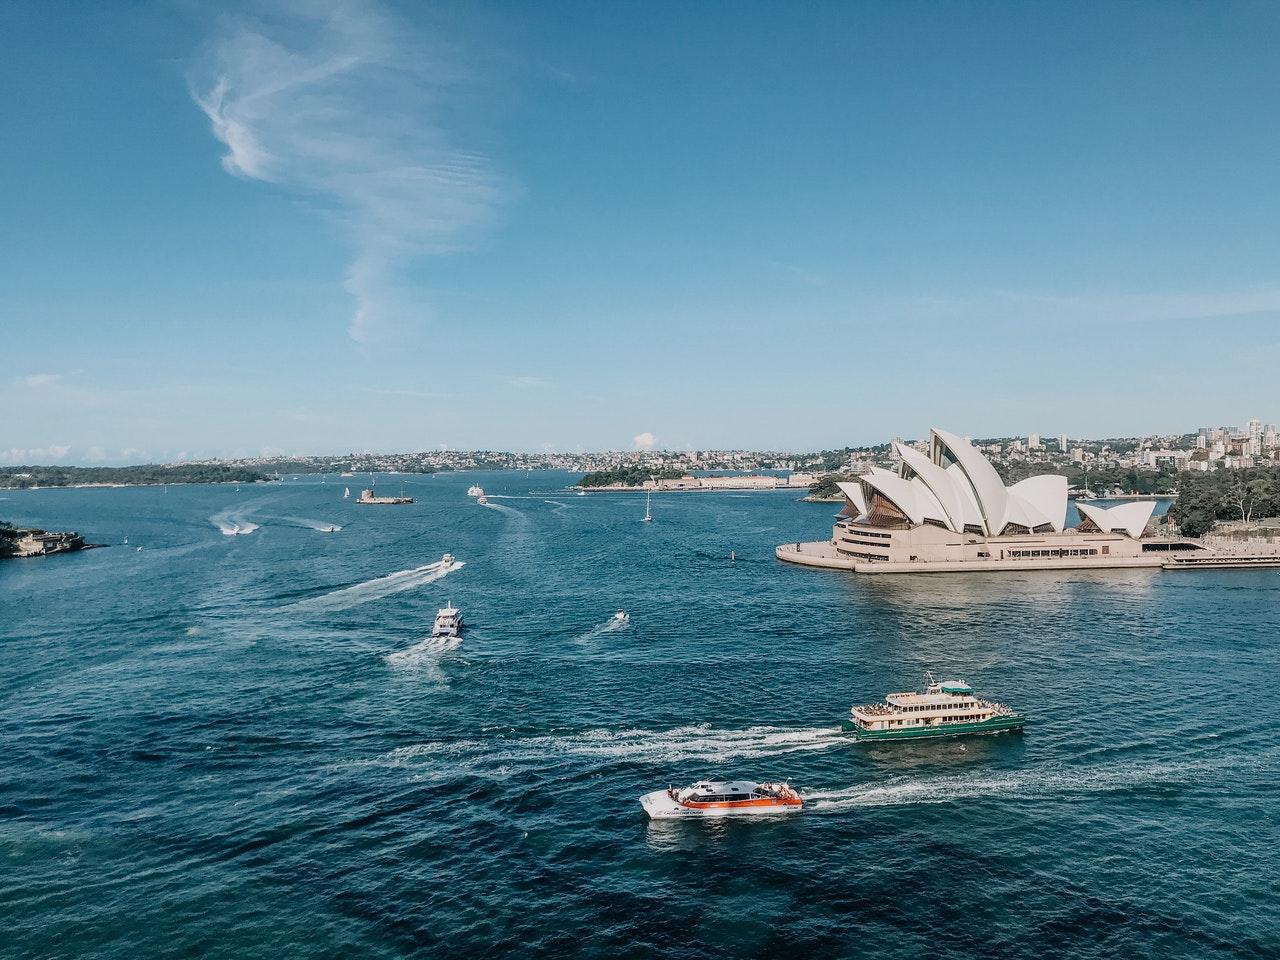 Passengers in Australia can book flights departing from Brisbane, Sydney or Melbourne, without knowing their destination, in Qantas' latest effort to boost domestic tourism. Photo: Pexels